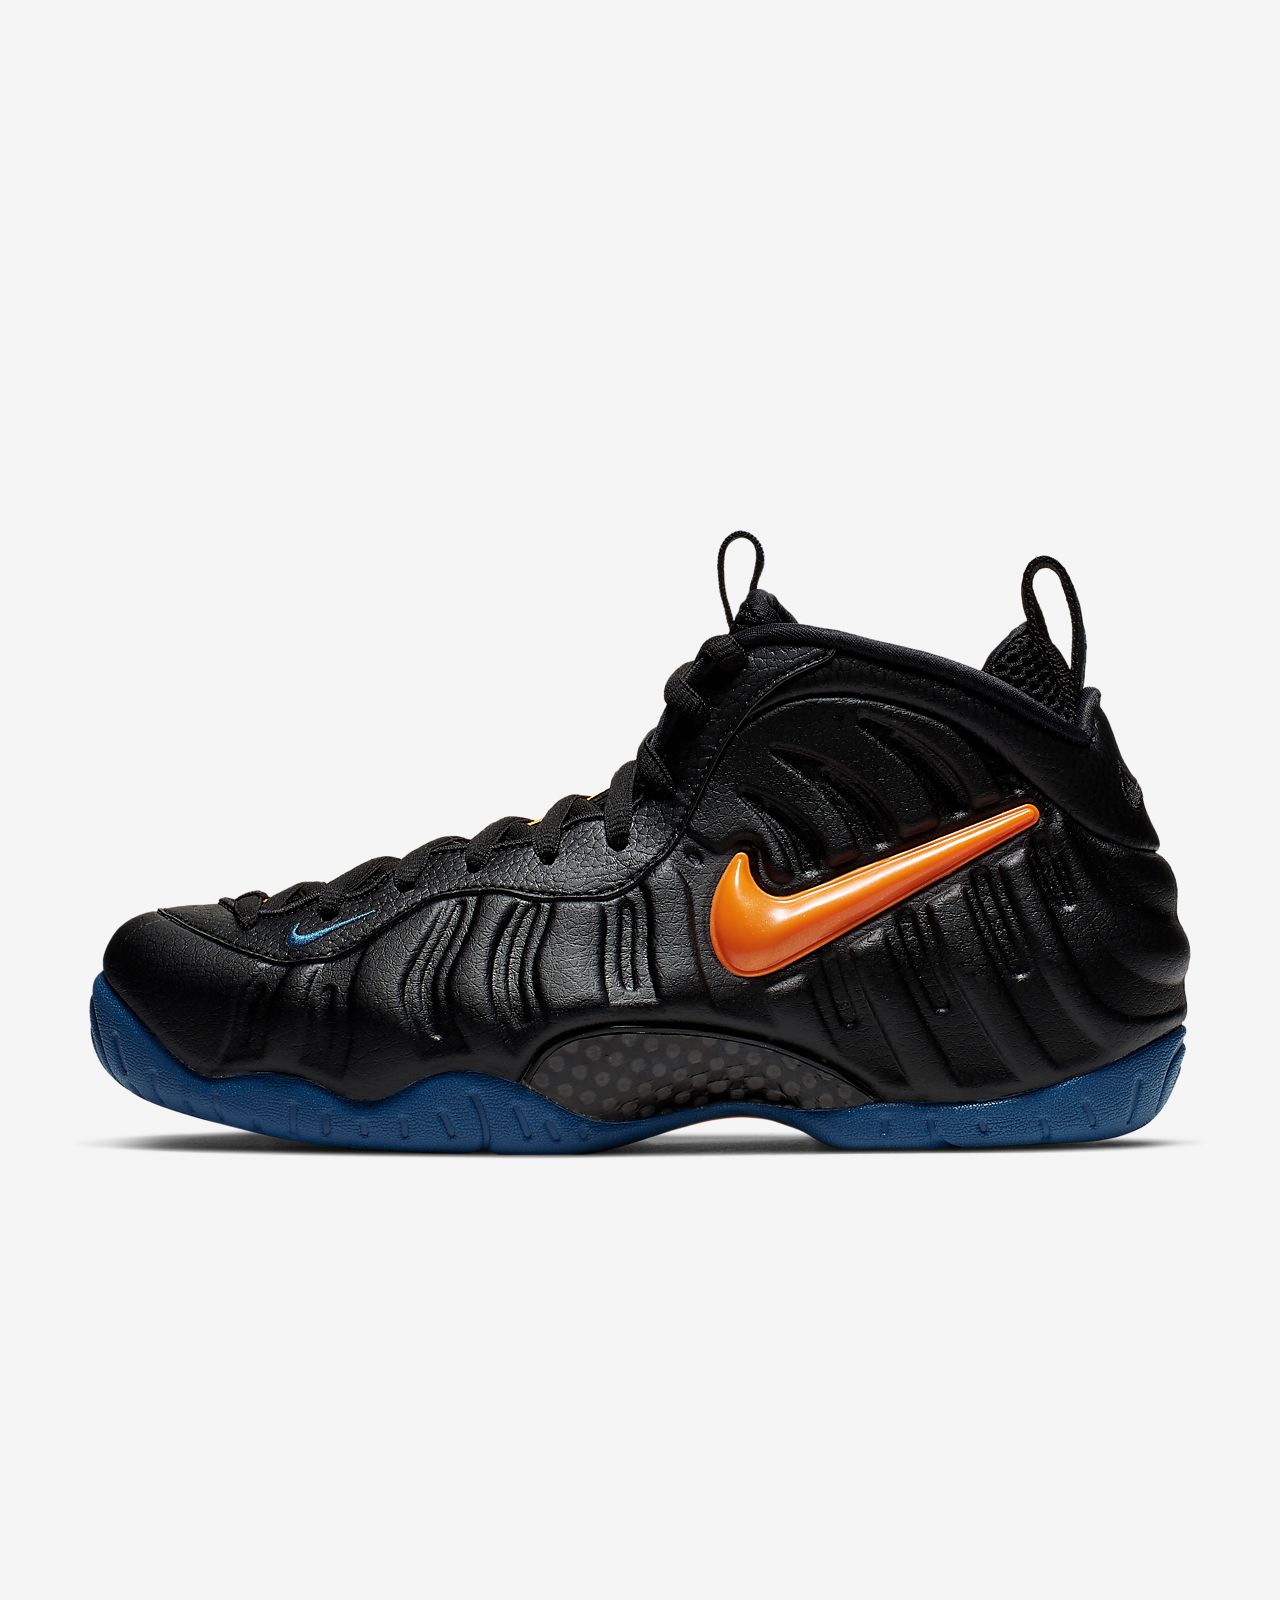 Foamposite Kijiji in Ontario. Buy, Sell & Save with Canada's